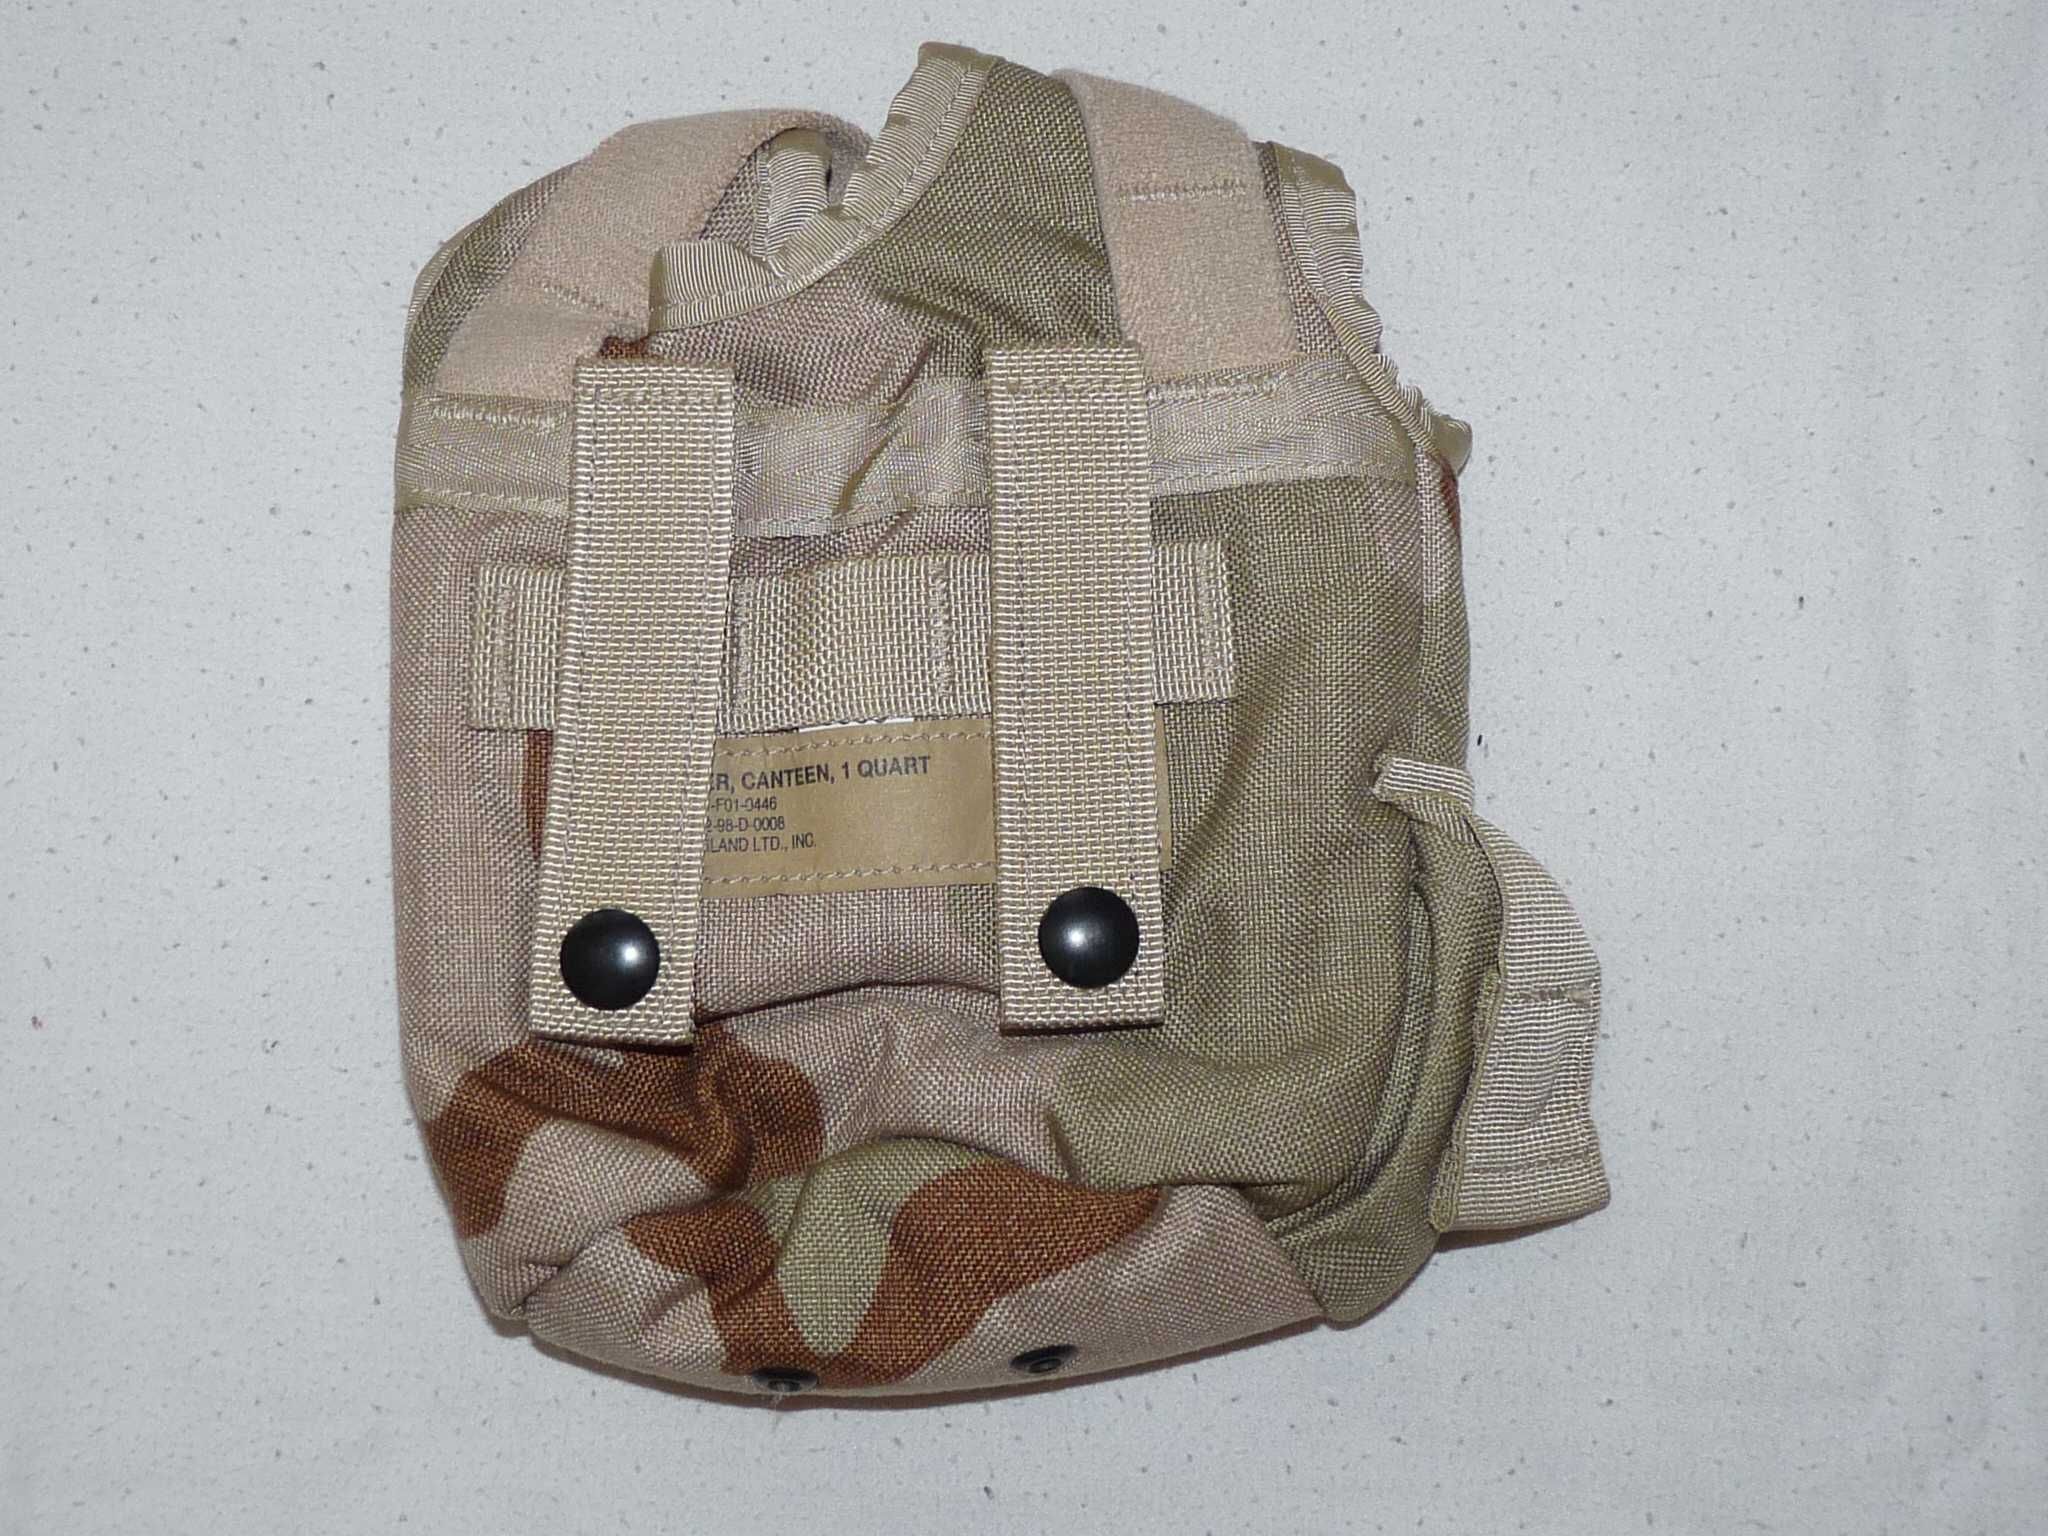 Safariland ELCS SPEAR Canteen Cover 1Q + alice adapter desert 3c molle